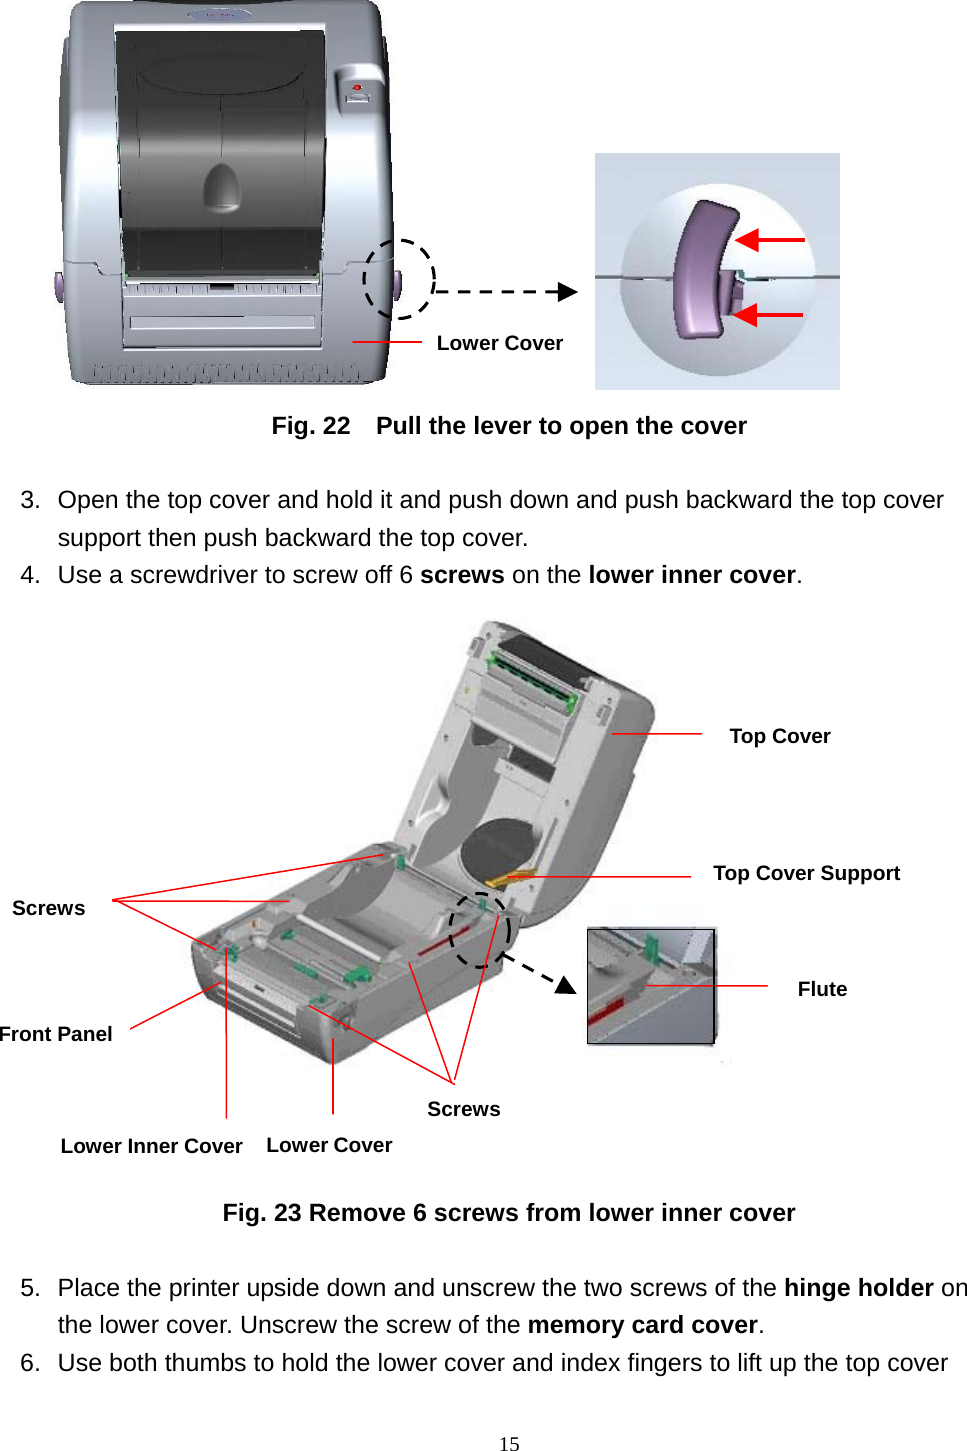  15               Fig. 22    Pull the lever to open the cover  3.  Open the top cover and hold it and push down and push backward the top cover support then push backward the top cover.     4.  Use a screwdriver to screw off 6 screws on the lower inner cover.                Fig. 23 Remove 6 screws from lower inner cover  5.  Place the printer upside down and unscrew the two screws of the hinge holder on the lower cover. Unscrew the screw of the memory card cover. 6.  Use both thumbs to hold the lower cover and index fingers to lift up the top cover Lower CoverScrewsTop Cover Screws Top Cover Support Flute Lower CoverLower Inner CoverFront Panel 